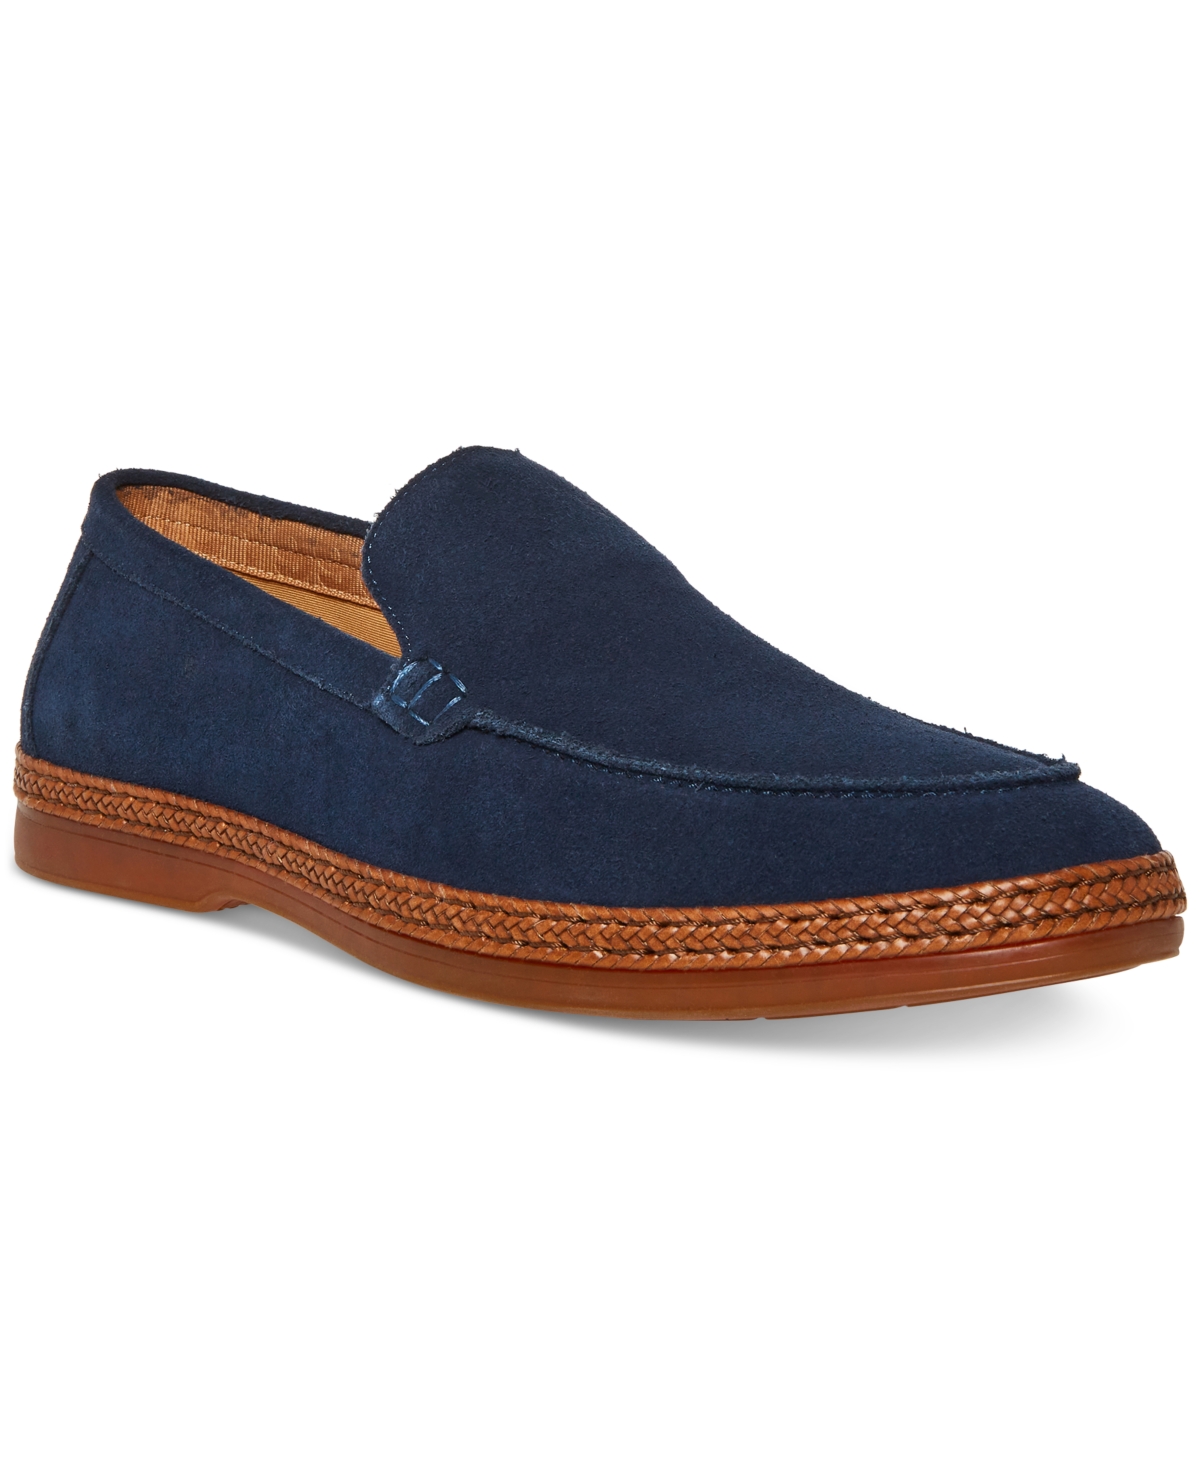 Steve Madden Men's Mateo Suede Dress Casual Loafer In Navy